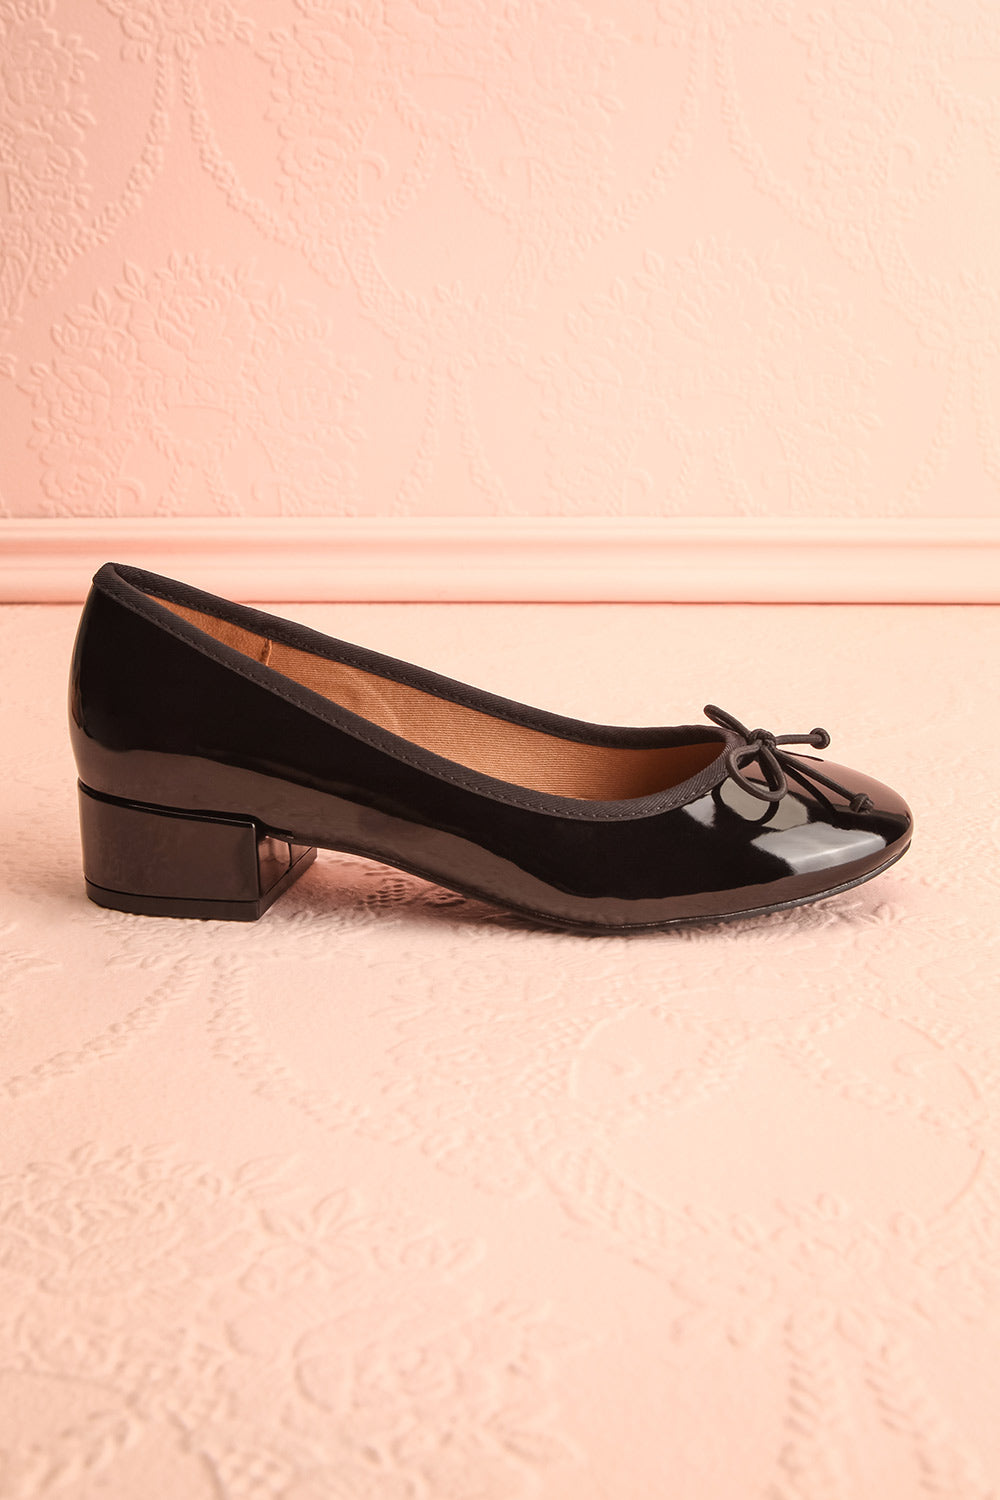 Celastina Black Heeled Ballet Shoes w/ Bow | Boutique 1861 side view